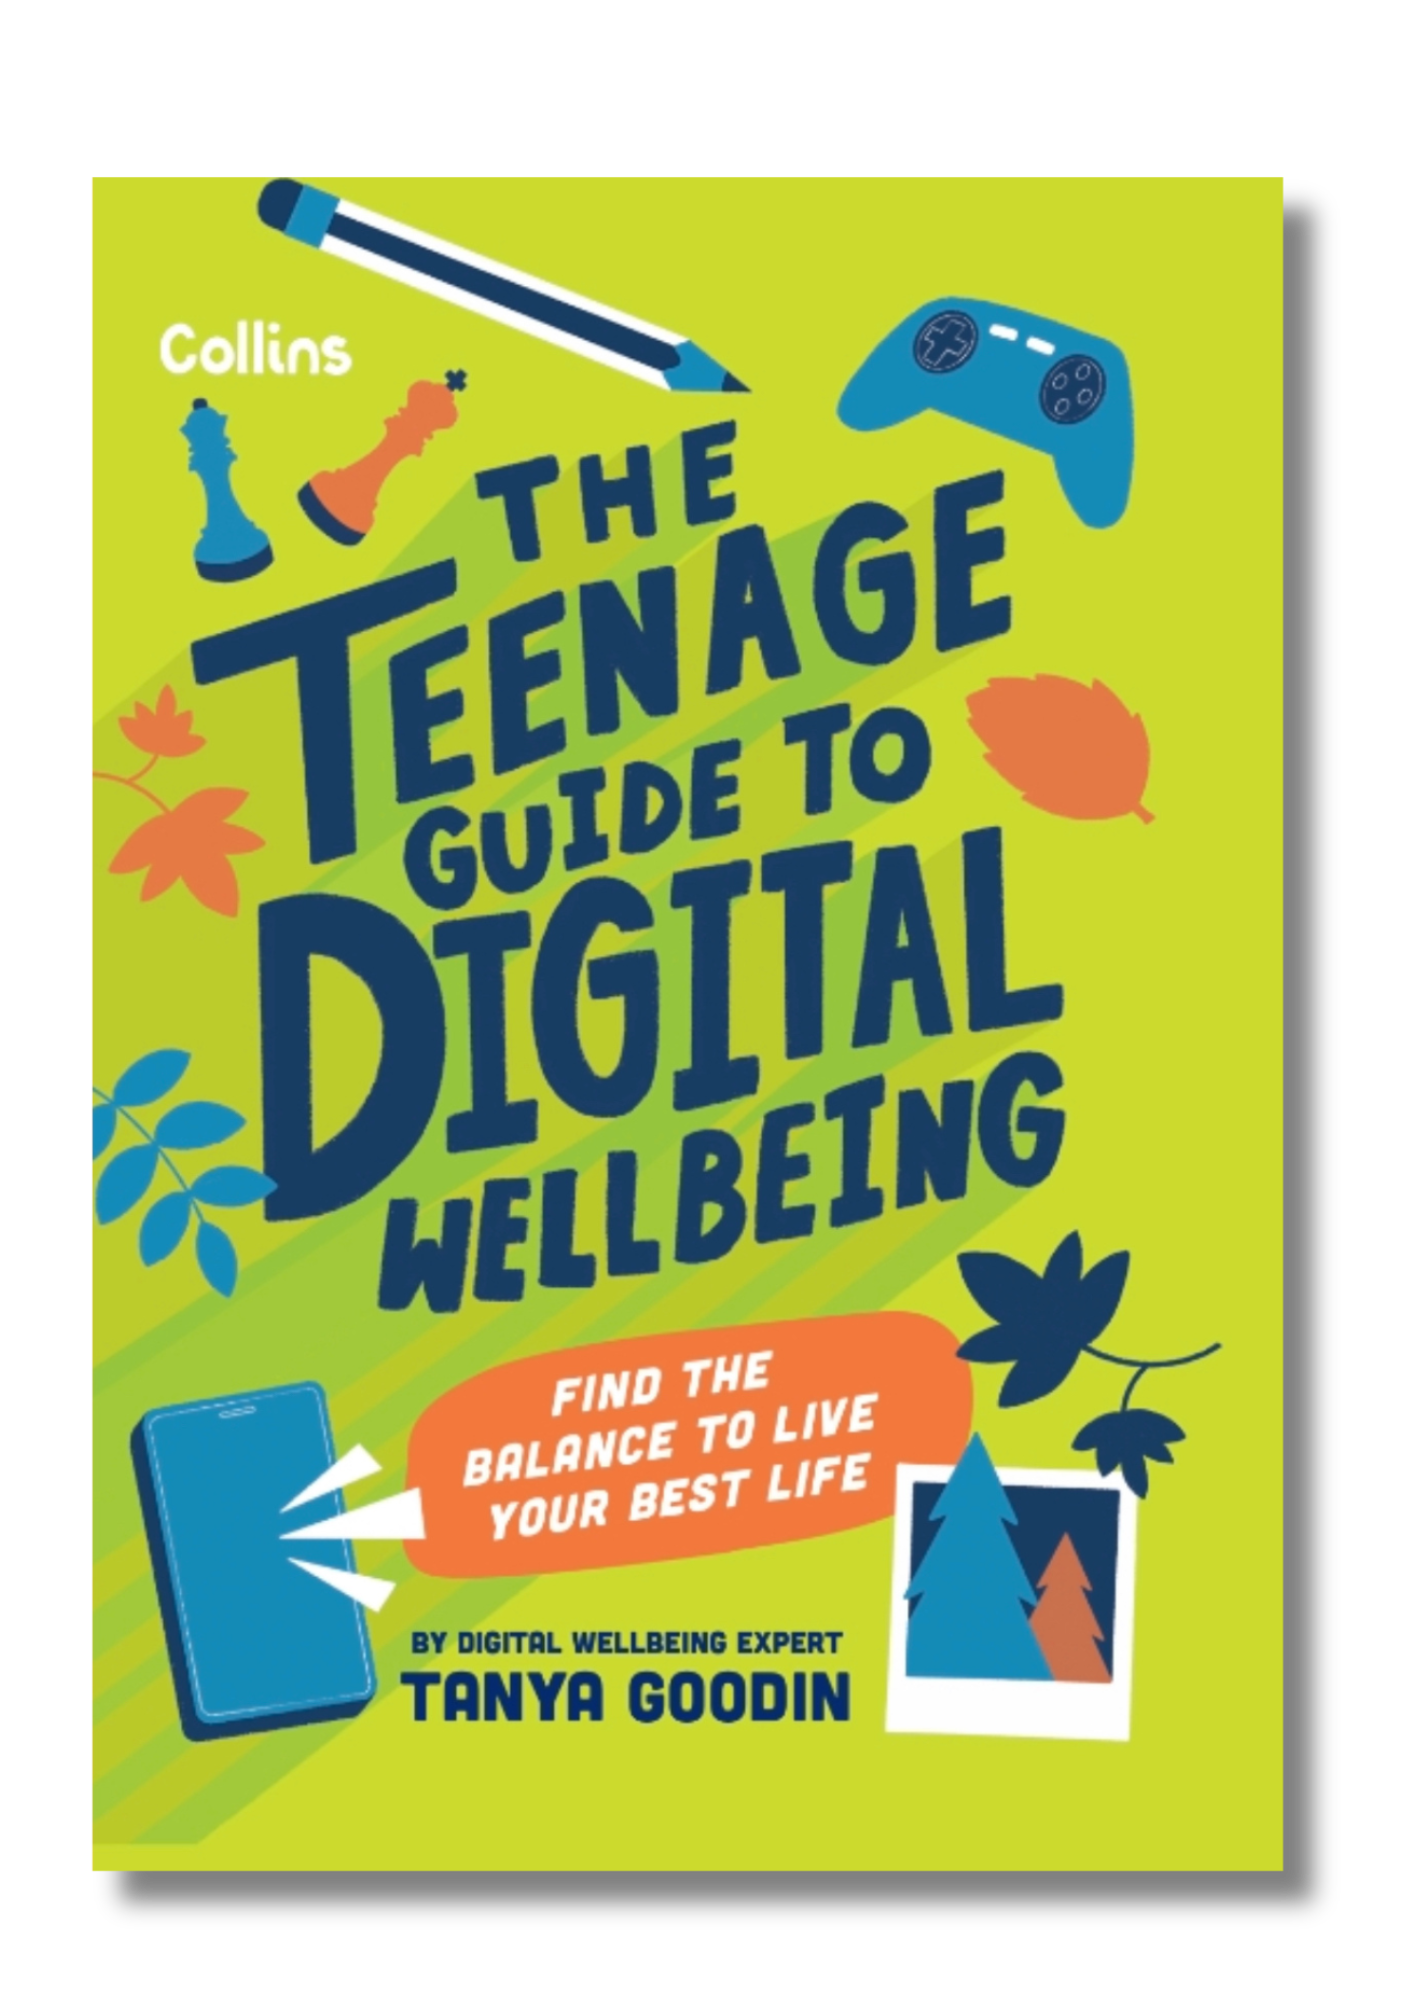 The Teenage Guide to Digital Wellbeing by Tanya Goodin